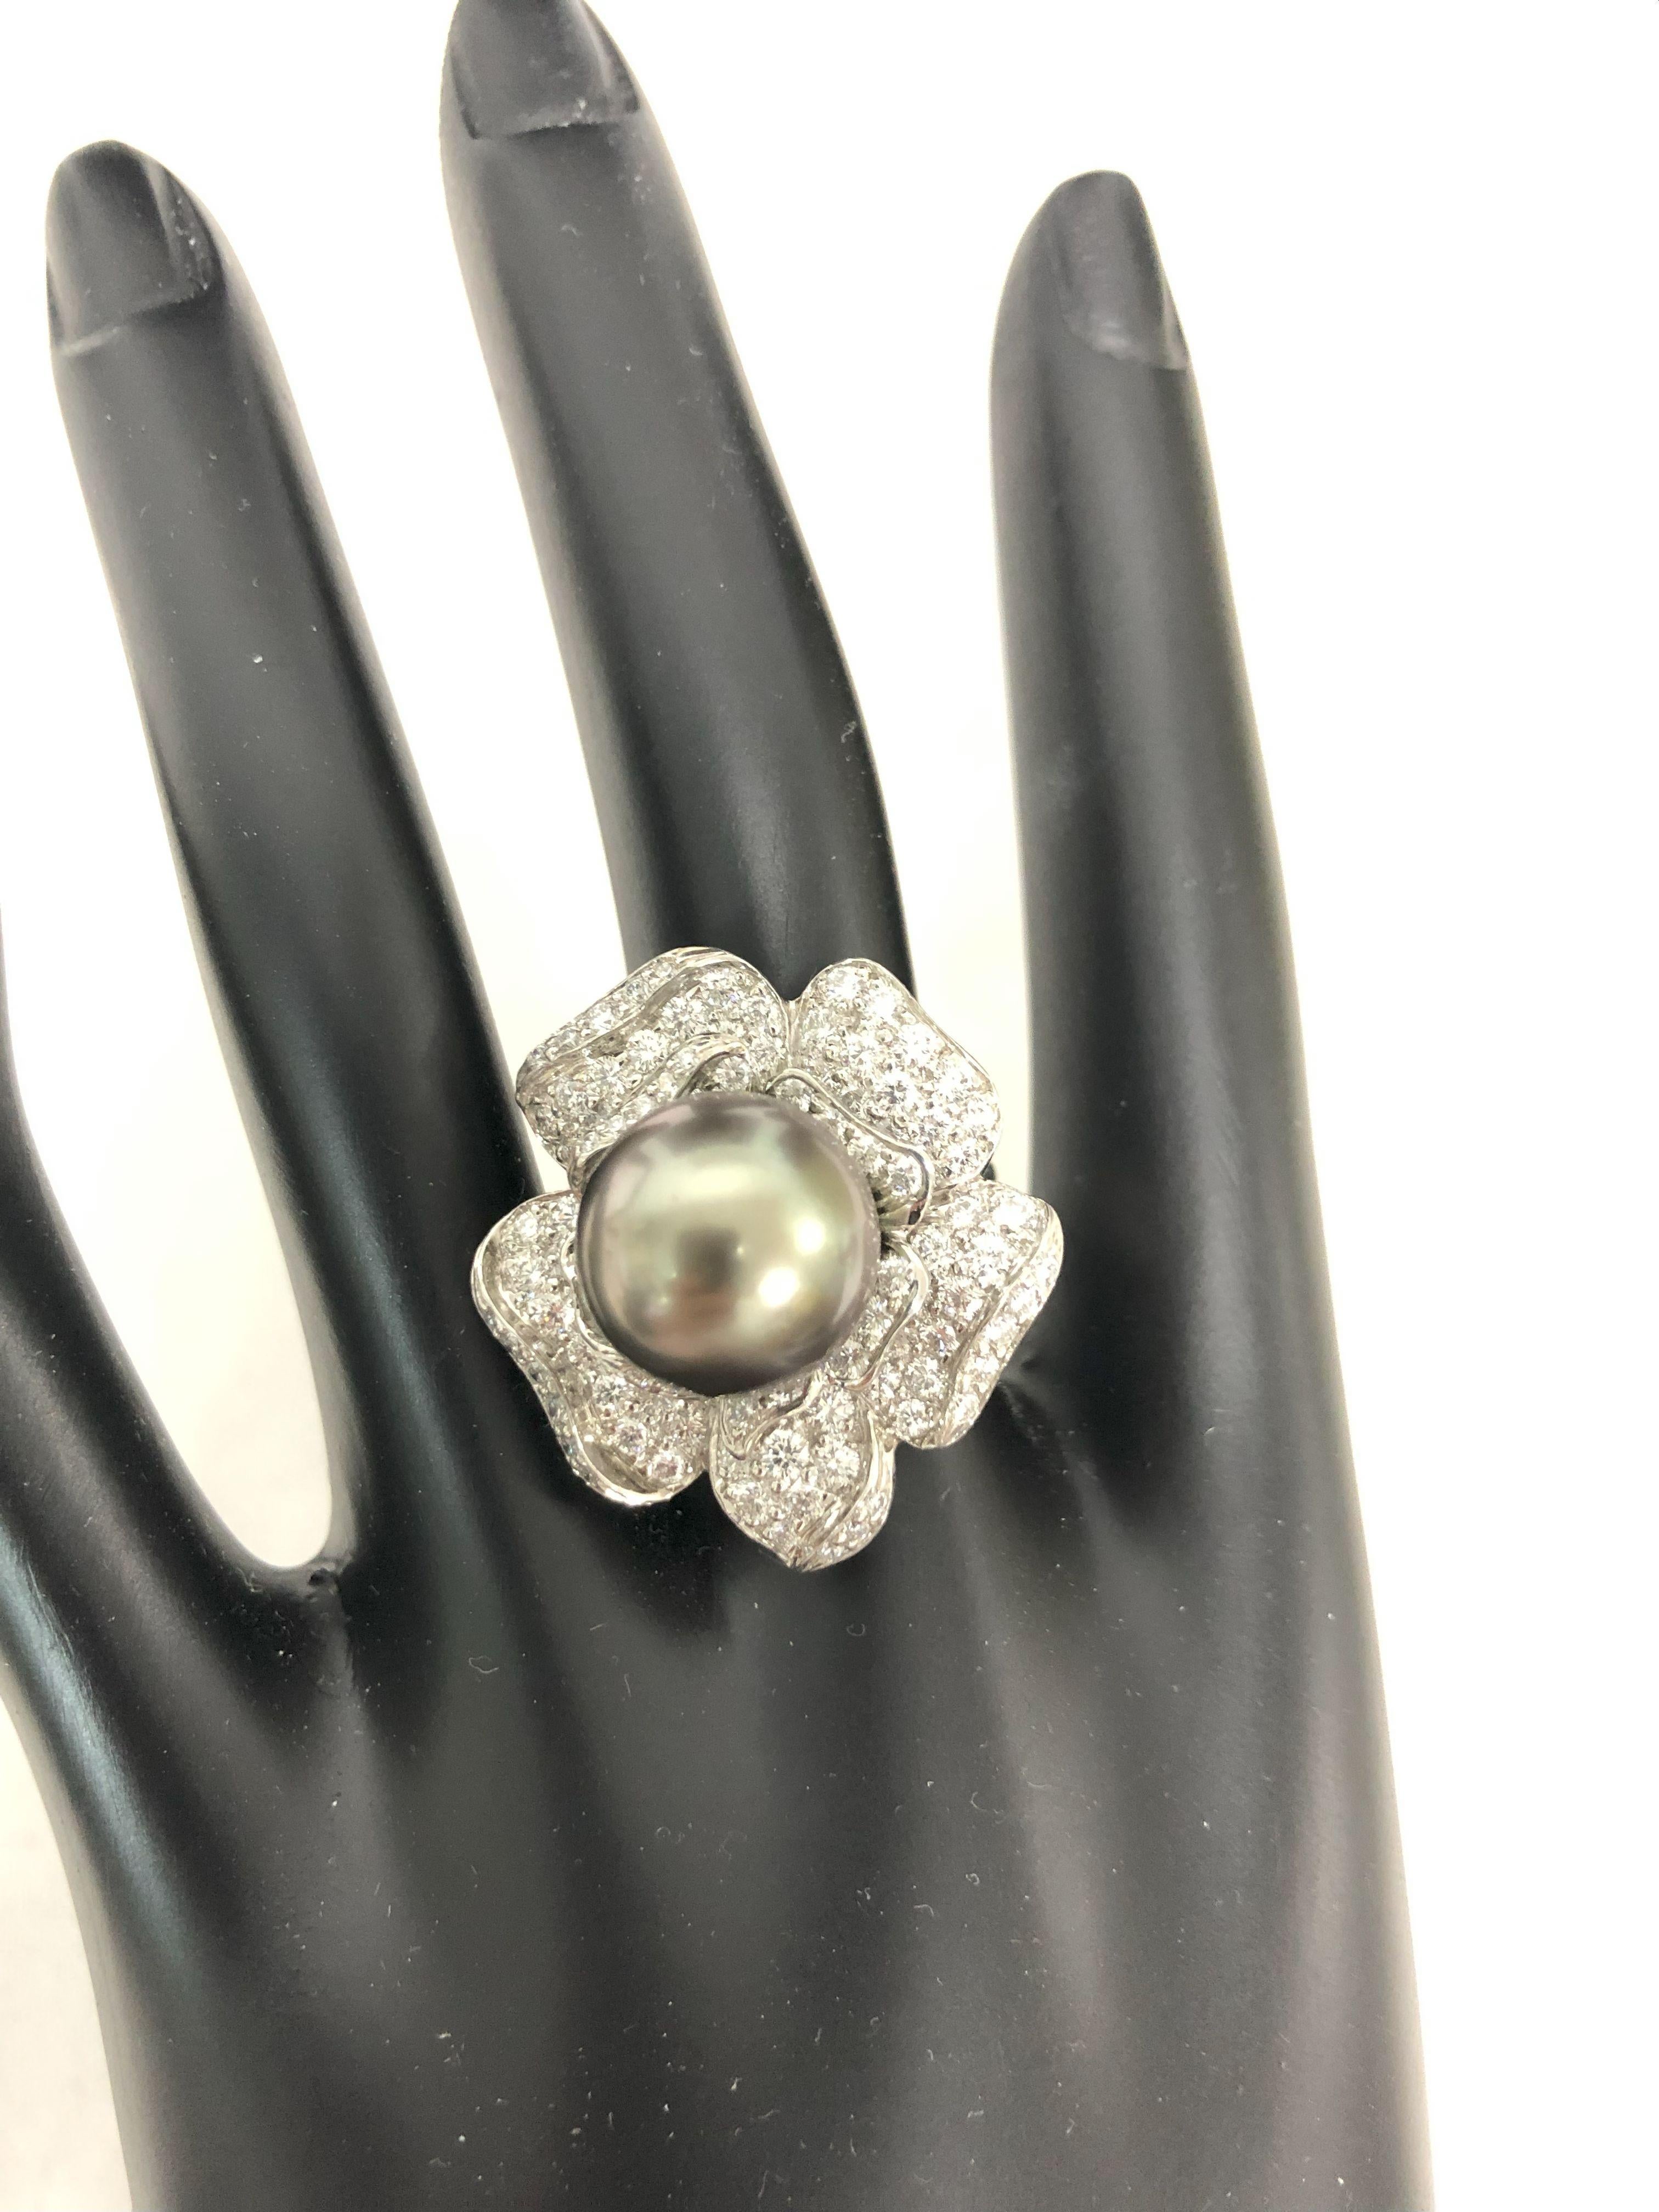 Oscar Heyman platinum ring contains a stunning 12mm Tahitian Pearl at the center of a flower composed of 102 round diamonds weighing 2.49cts (F-G/VS) that are bead set. It is stamped with the makers mark, IRID PLAT, and serial number 302442. The